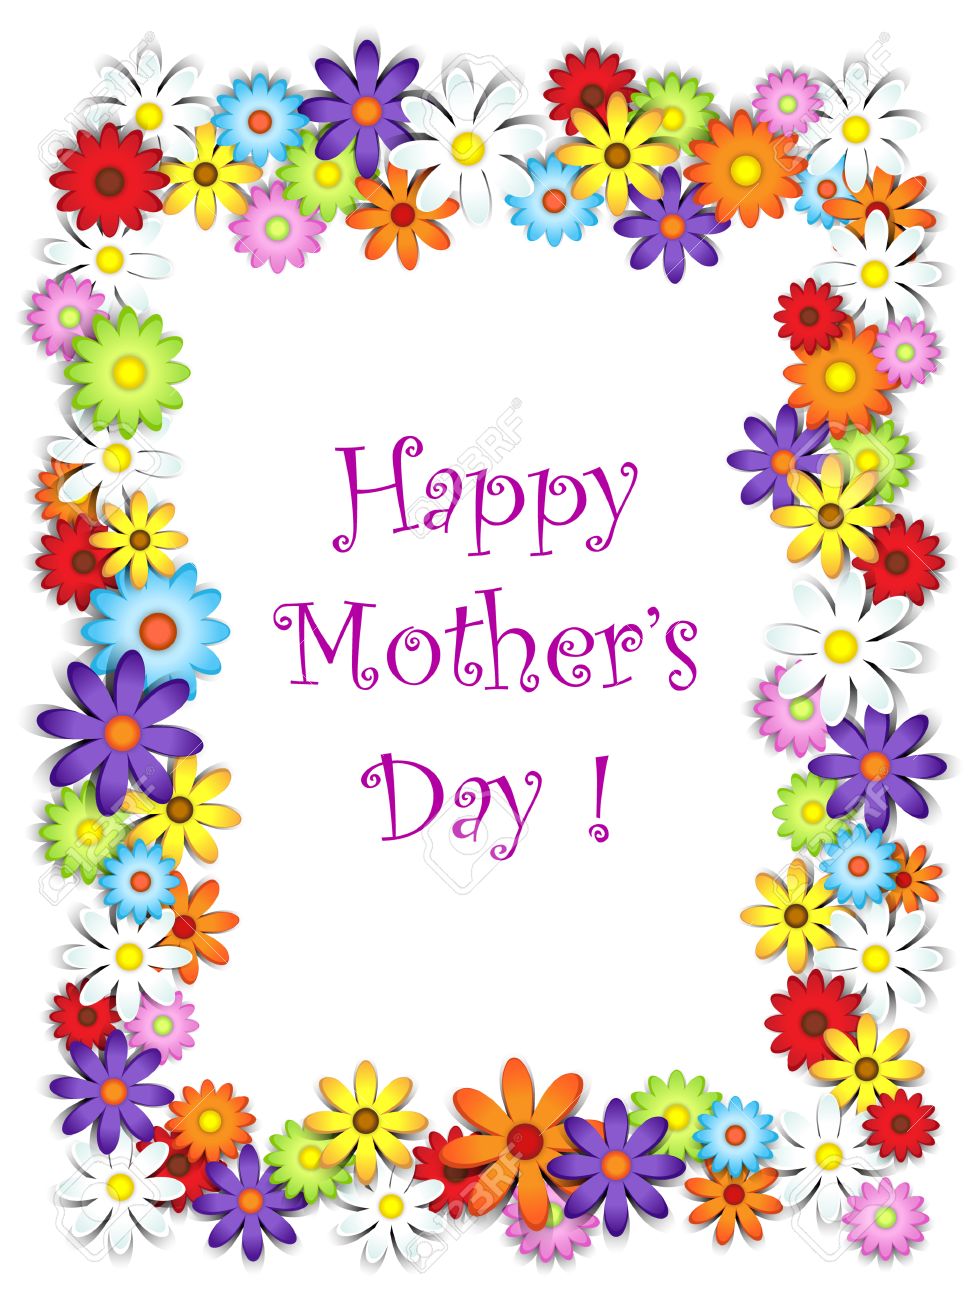 mothers-day-borders-clipart-10-free-cliparts-download-images-on